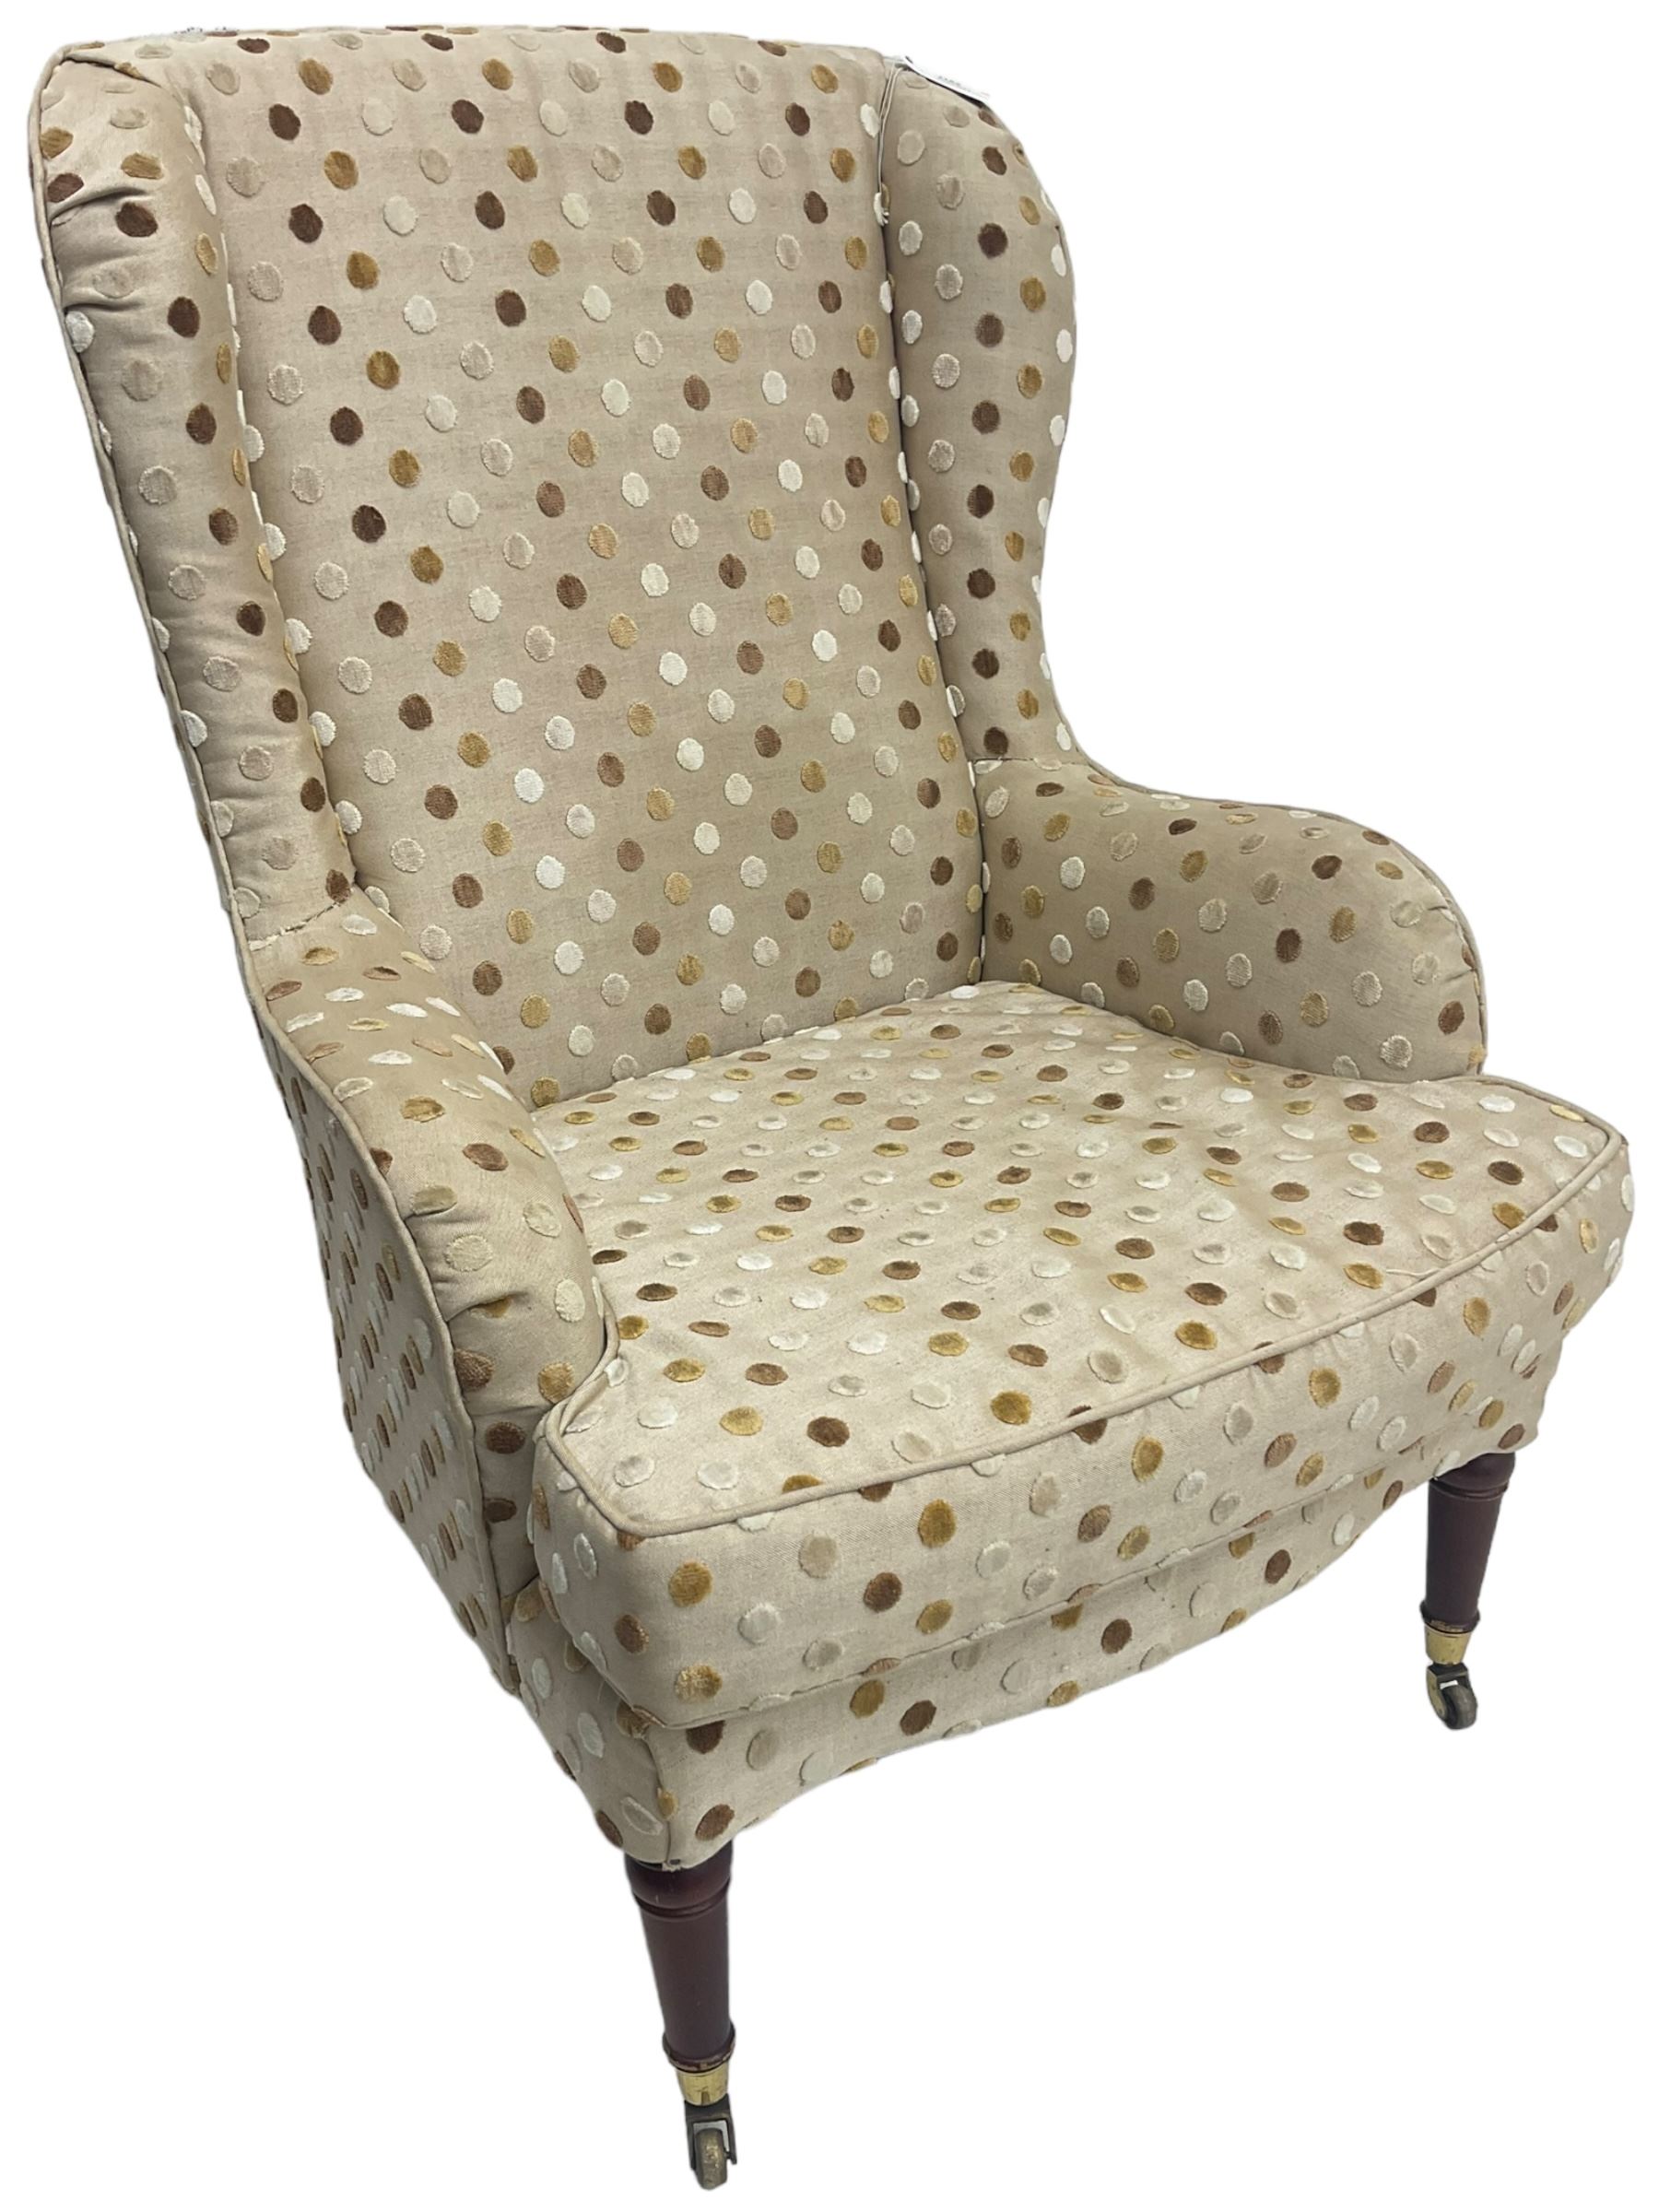 Victorian design wingback armchair - Image 2 of 7